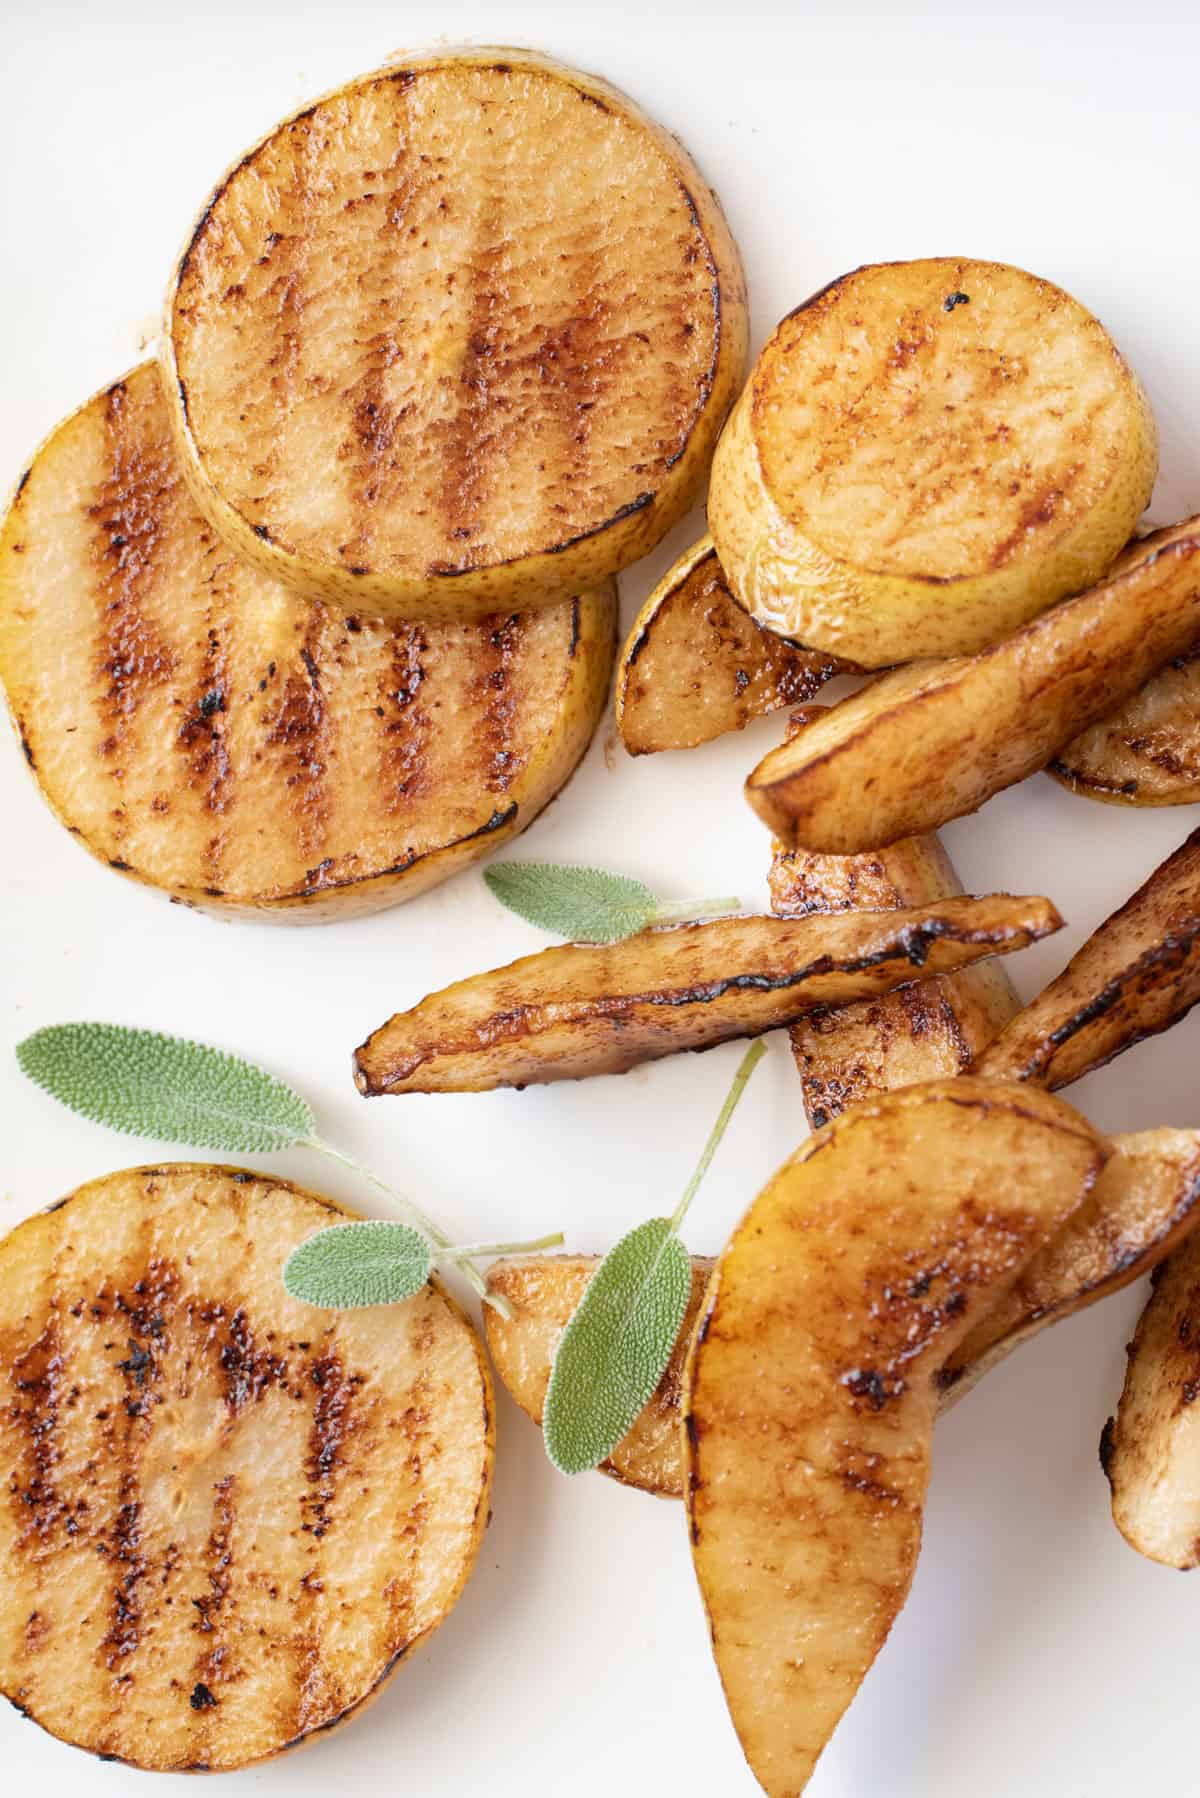 A plate of grilled pears and a leafy plant.